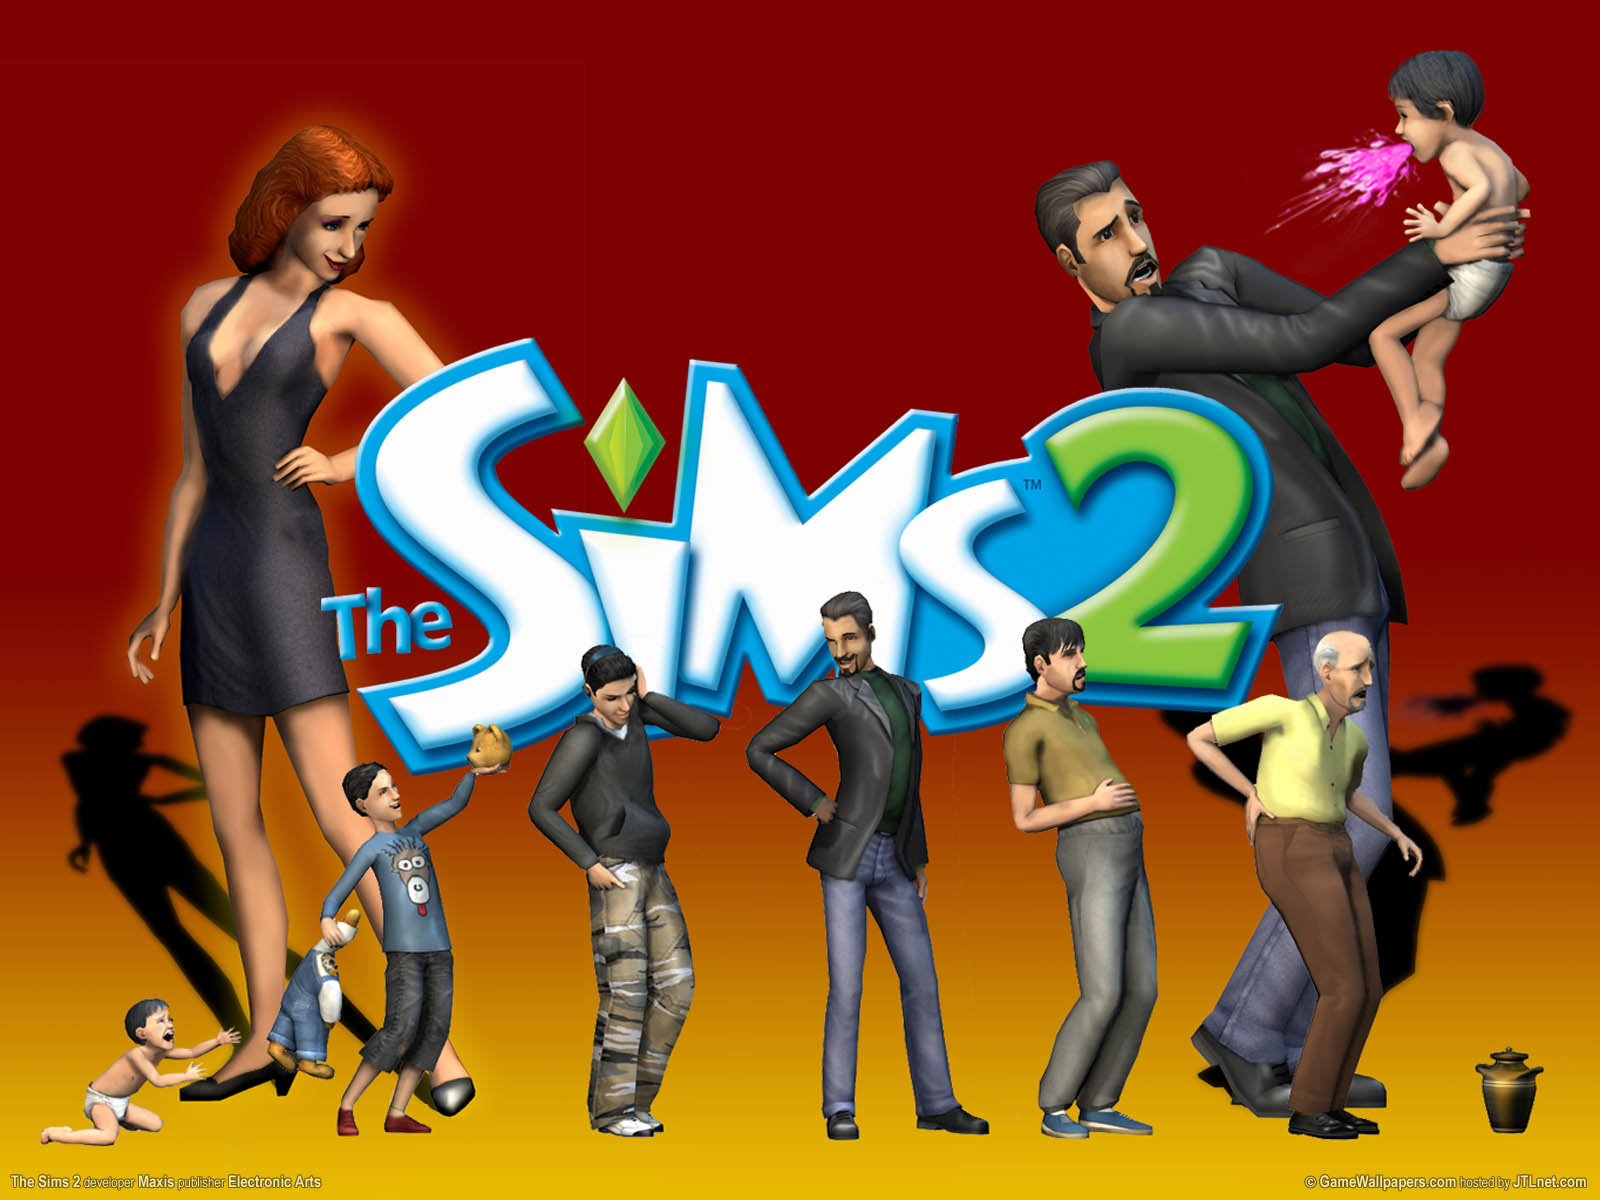 The Sims 2 wallpaper 01 1600x1200